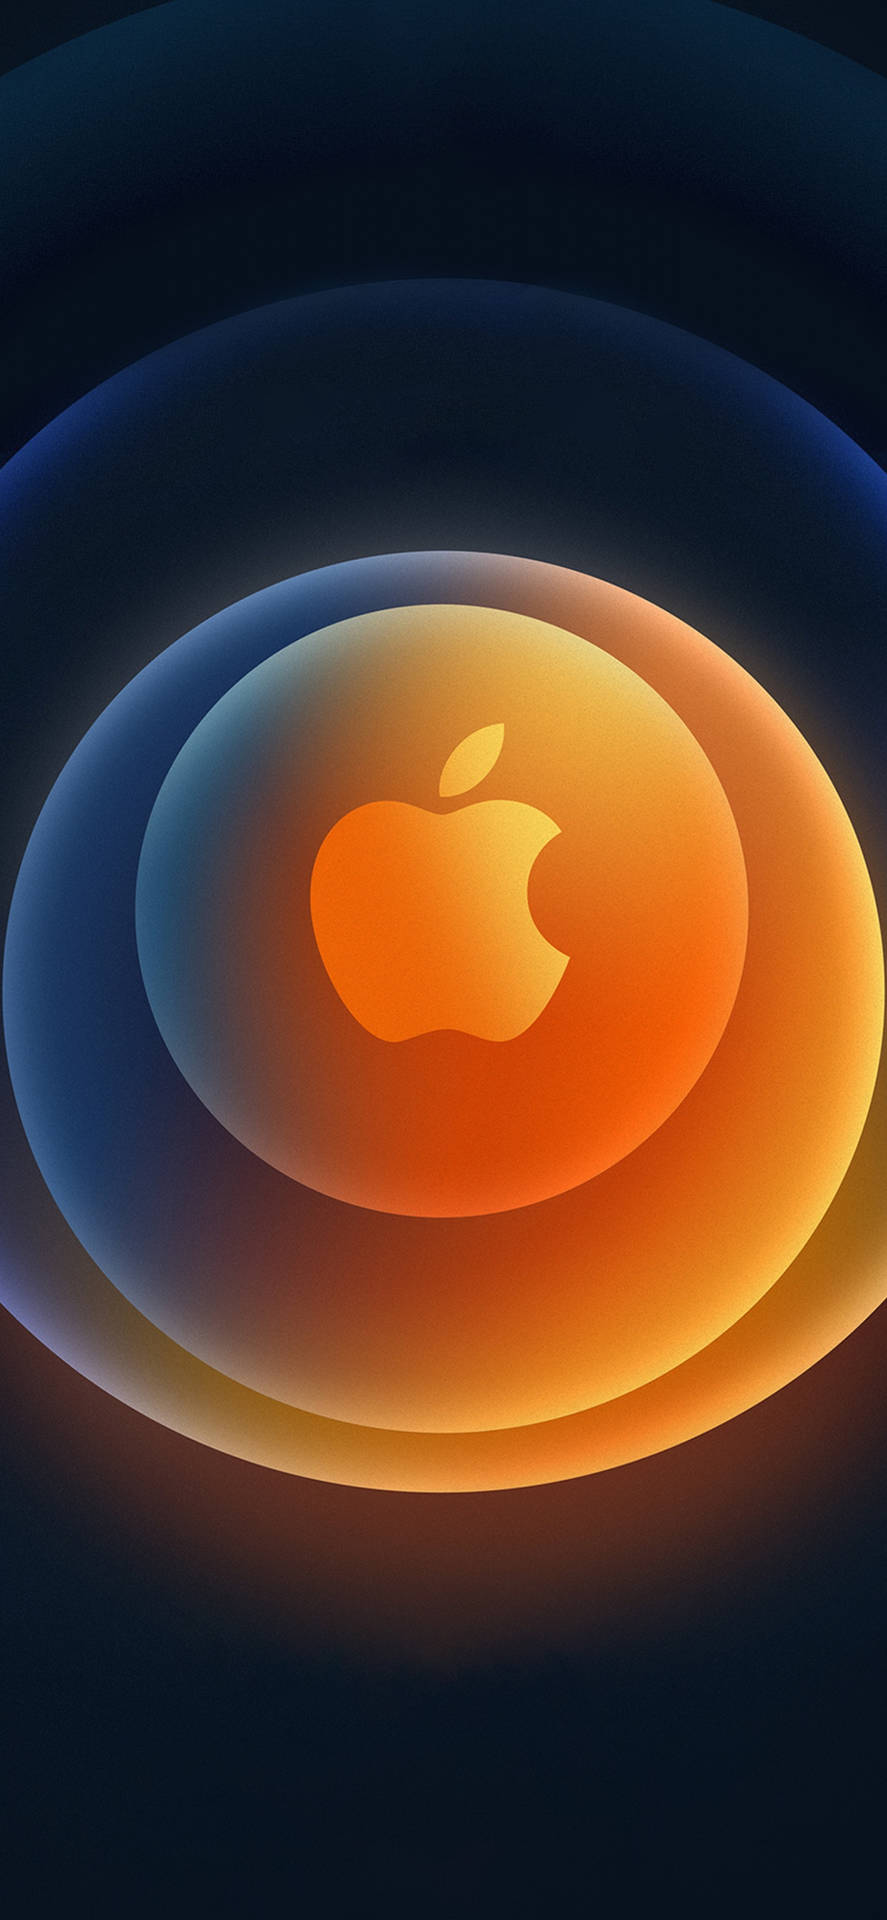 3d Apple Iphone Logo Concentric Circles Background